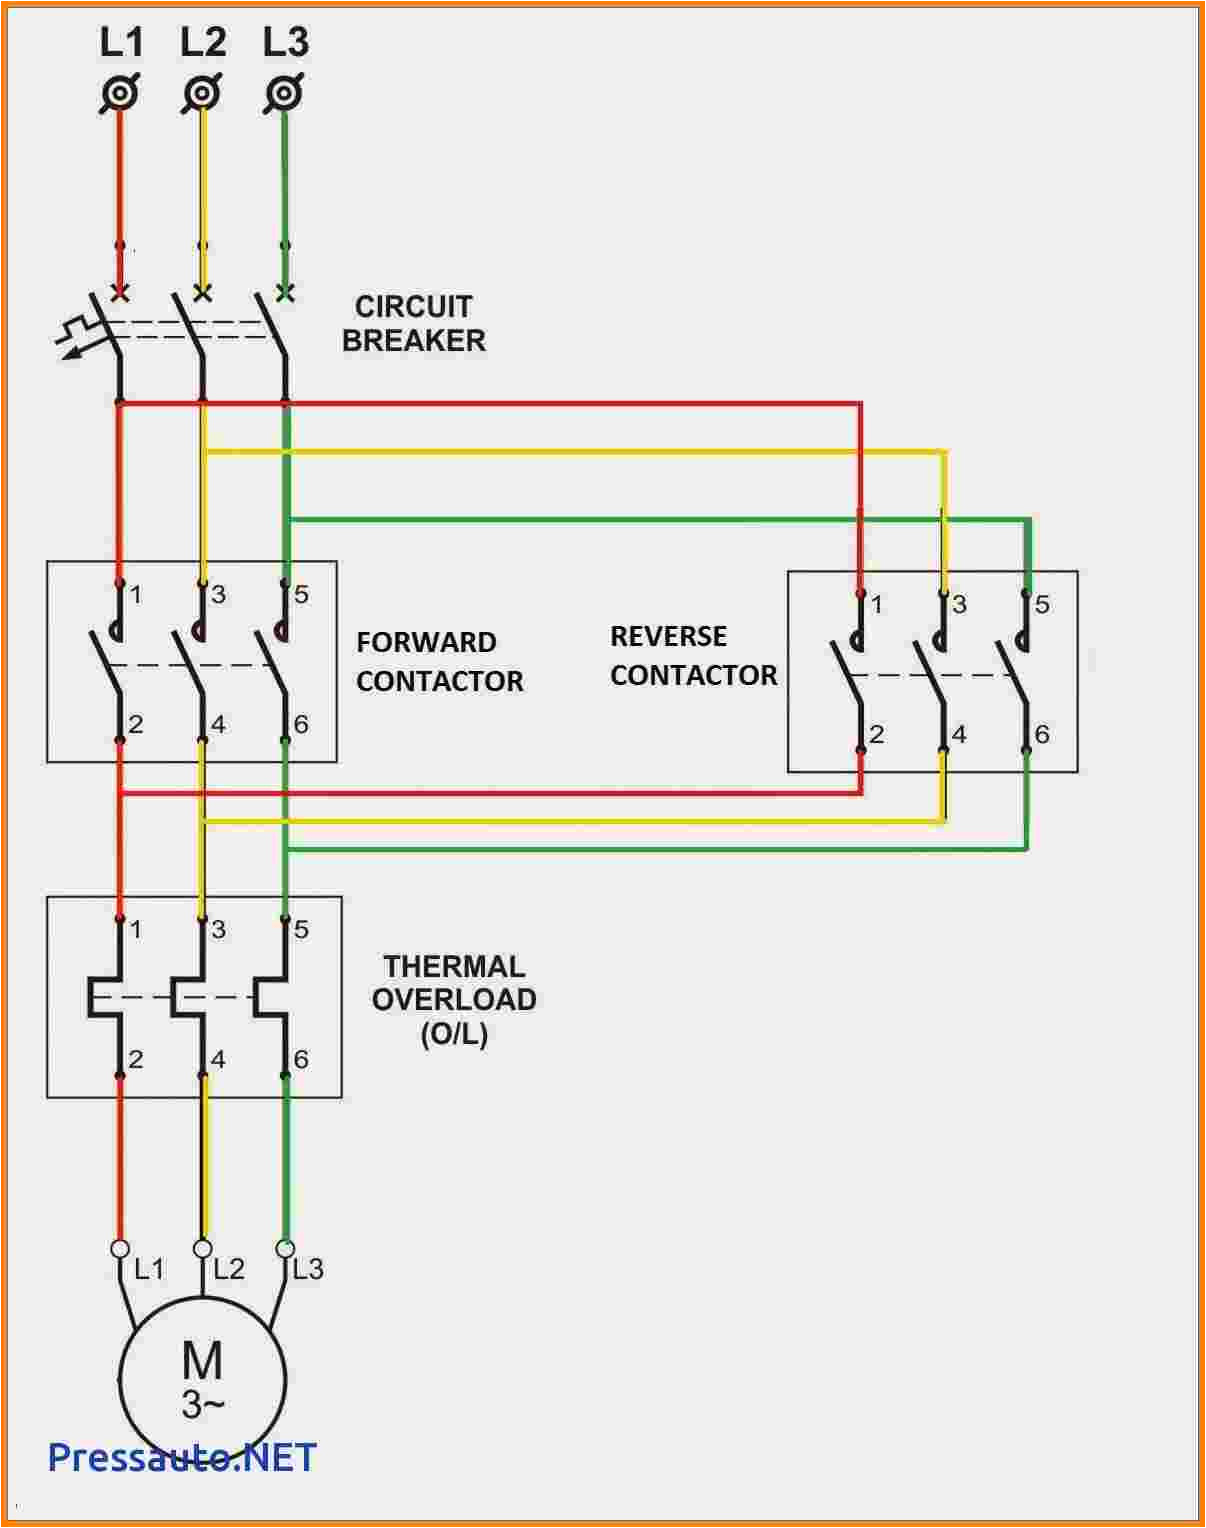 electrical contactors wiring wiring diagram perfomanceelectric contactor wiring diagram wiring diagram perfomance electric contactor diagram wiring